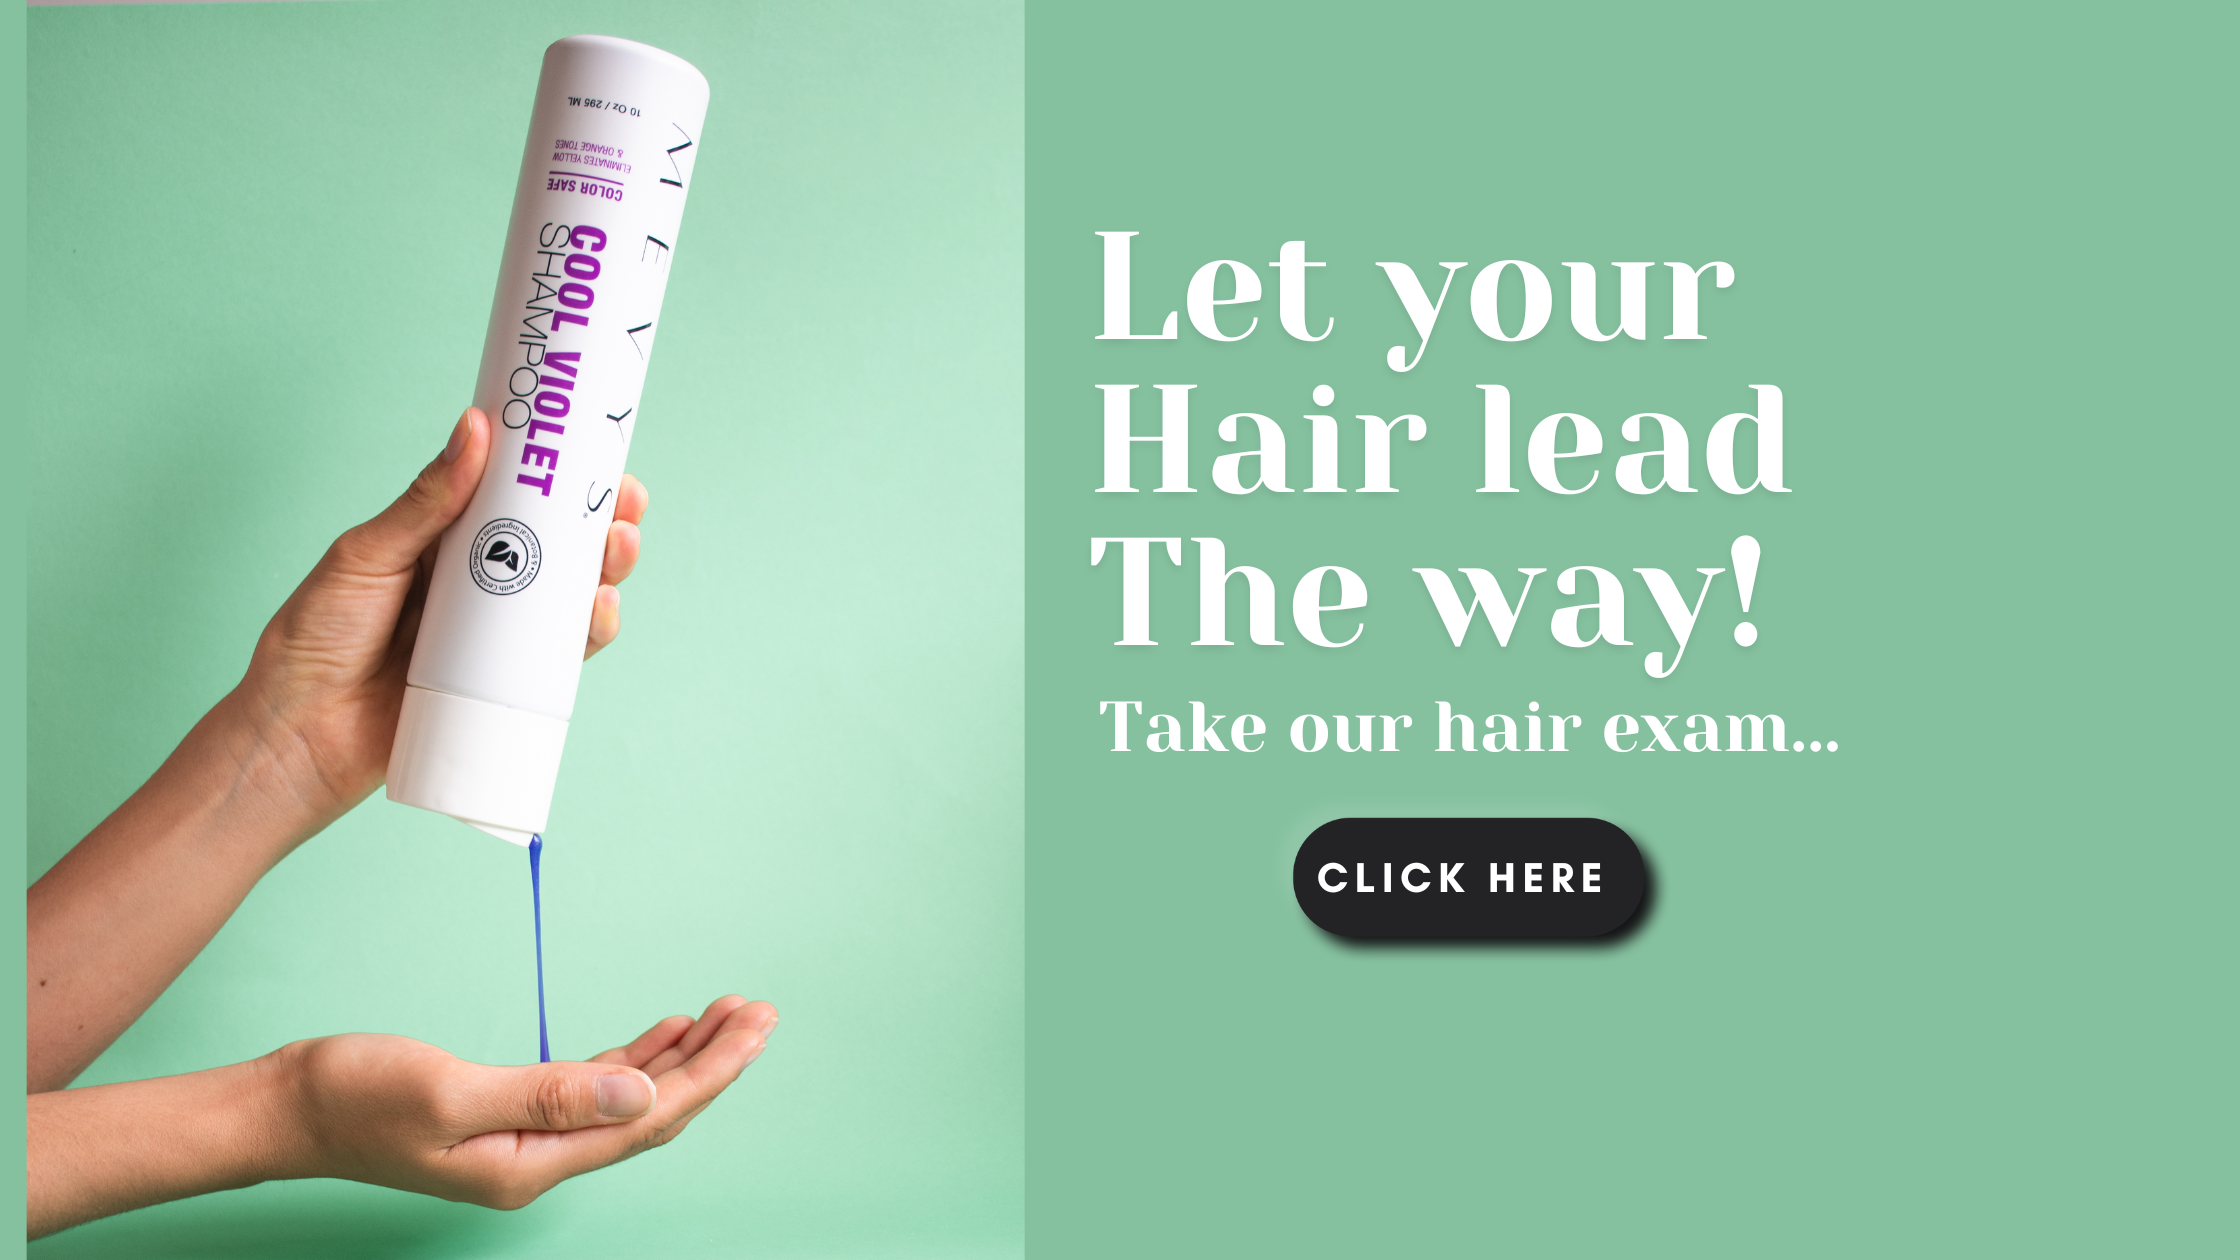 Take this Hair exam if you want to repair your damaged hair